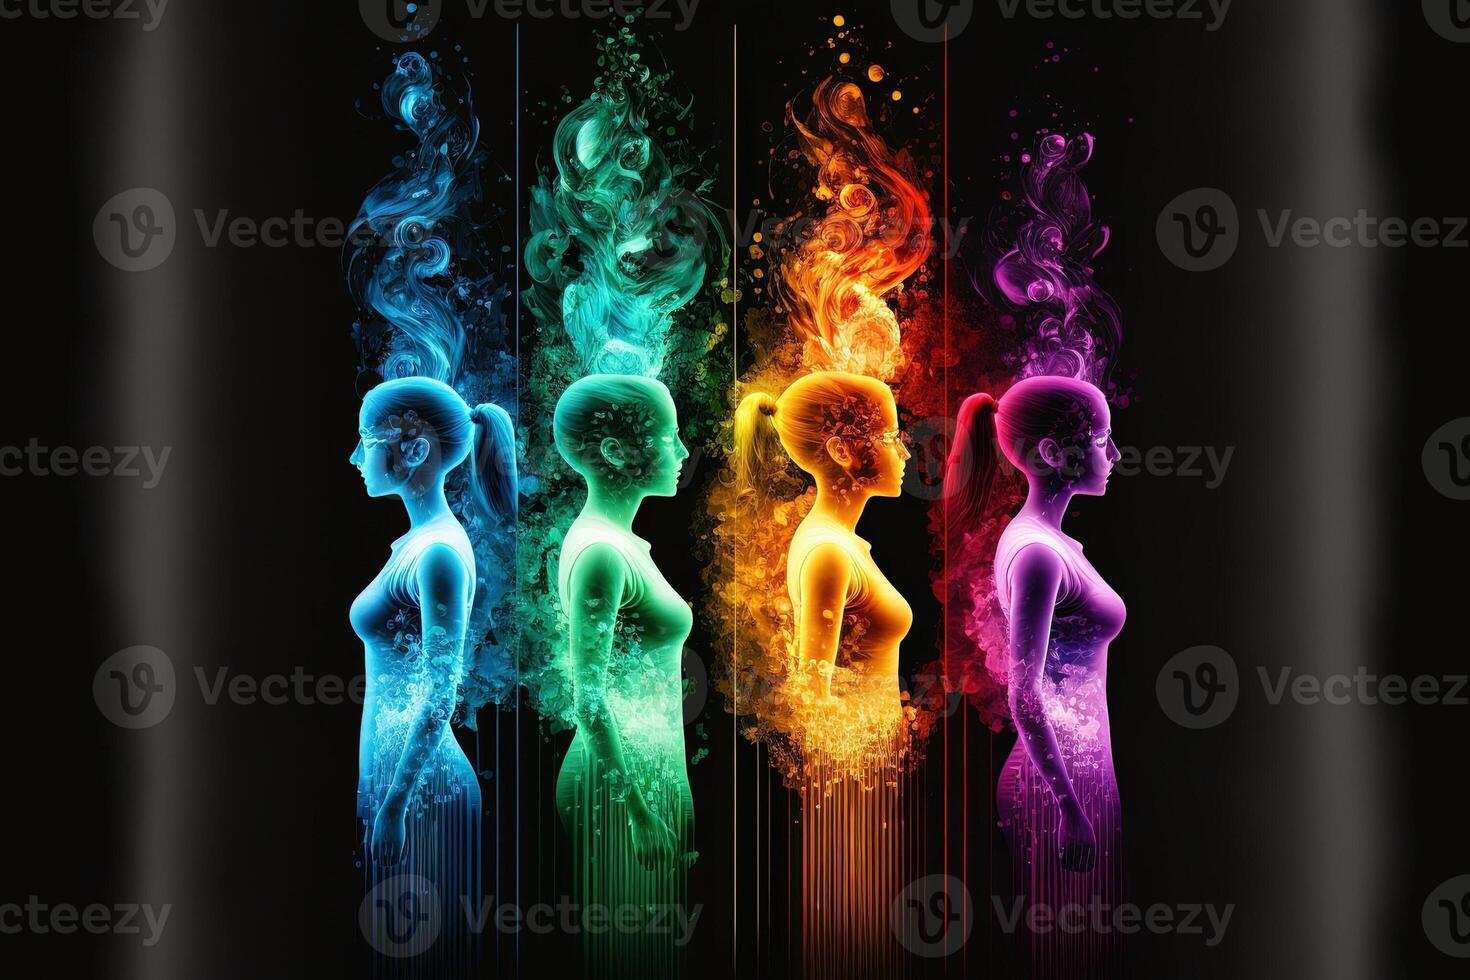 Gender spectrum abstract concept of human diversity using different colors illustration photo